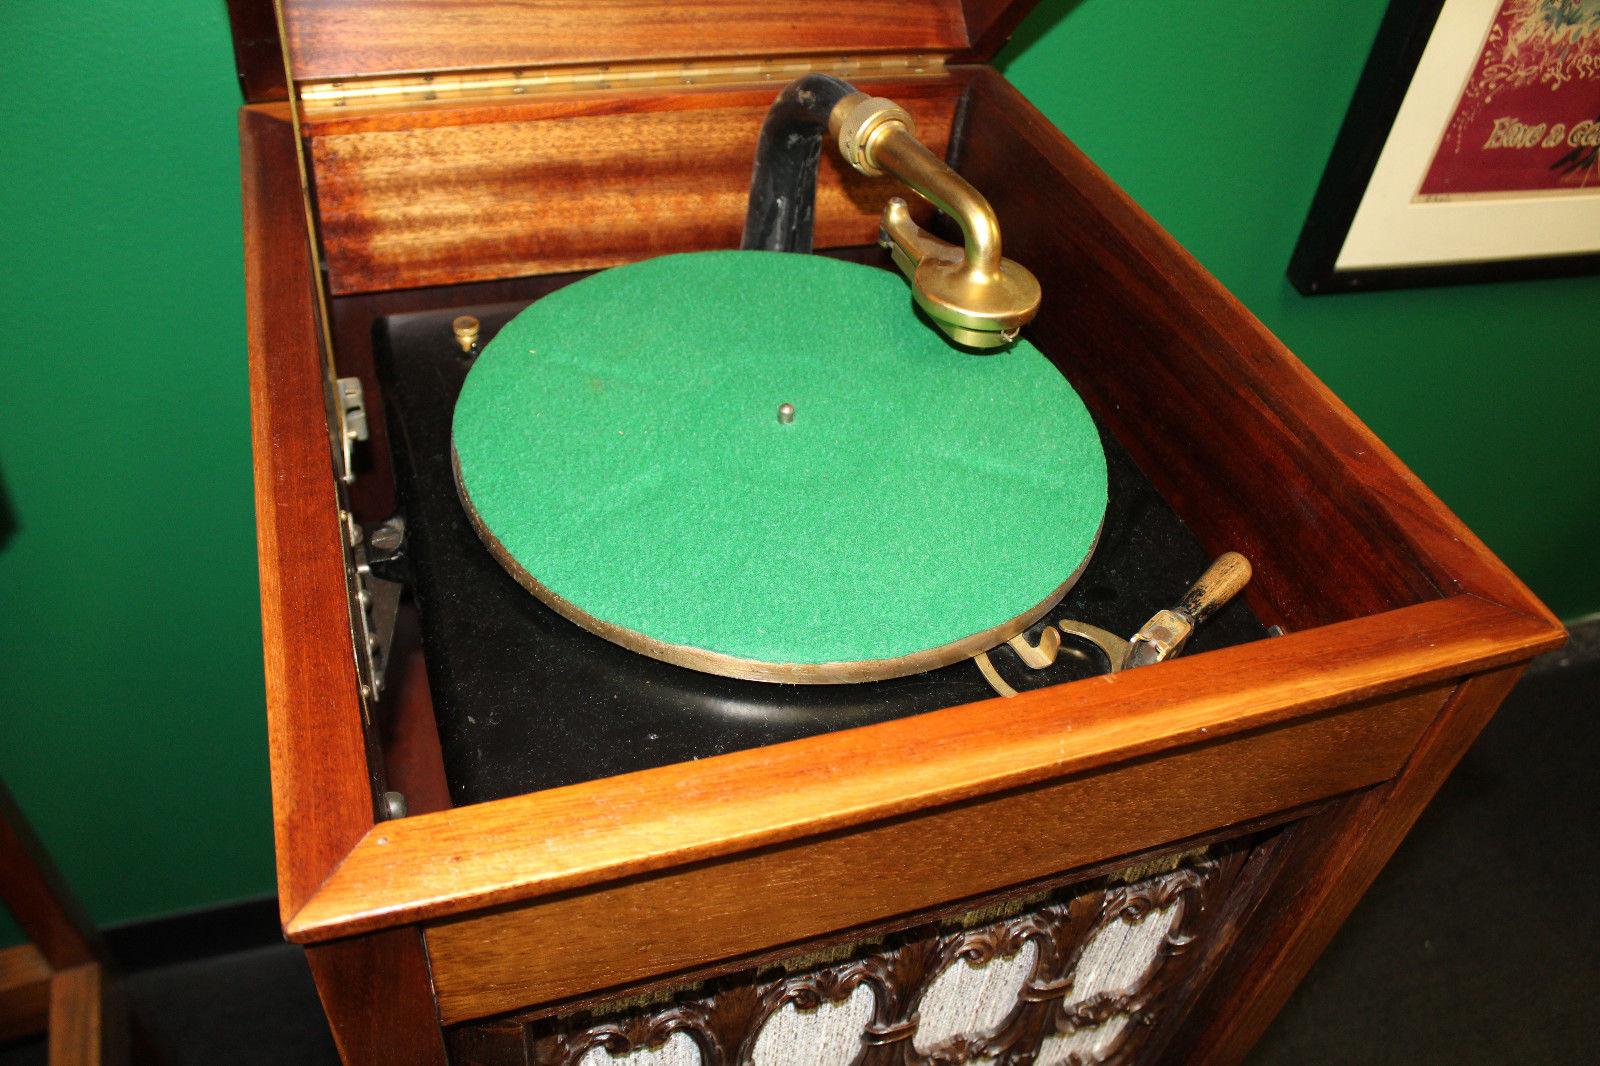 Thomas A. Edison Model H-19 disc phonograph.
Serial #SM-26735, with the fleur-de-lis grille and gold-plated metal parts. Design of this mahogany model began at the end of World War I, and it was first unveiled in March 1919 at a trade show in